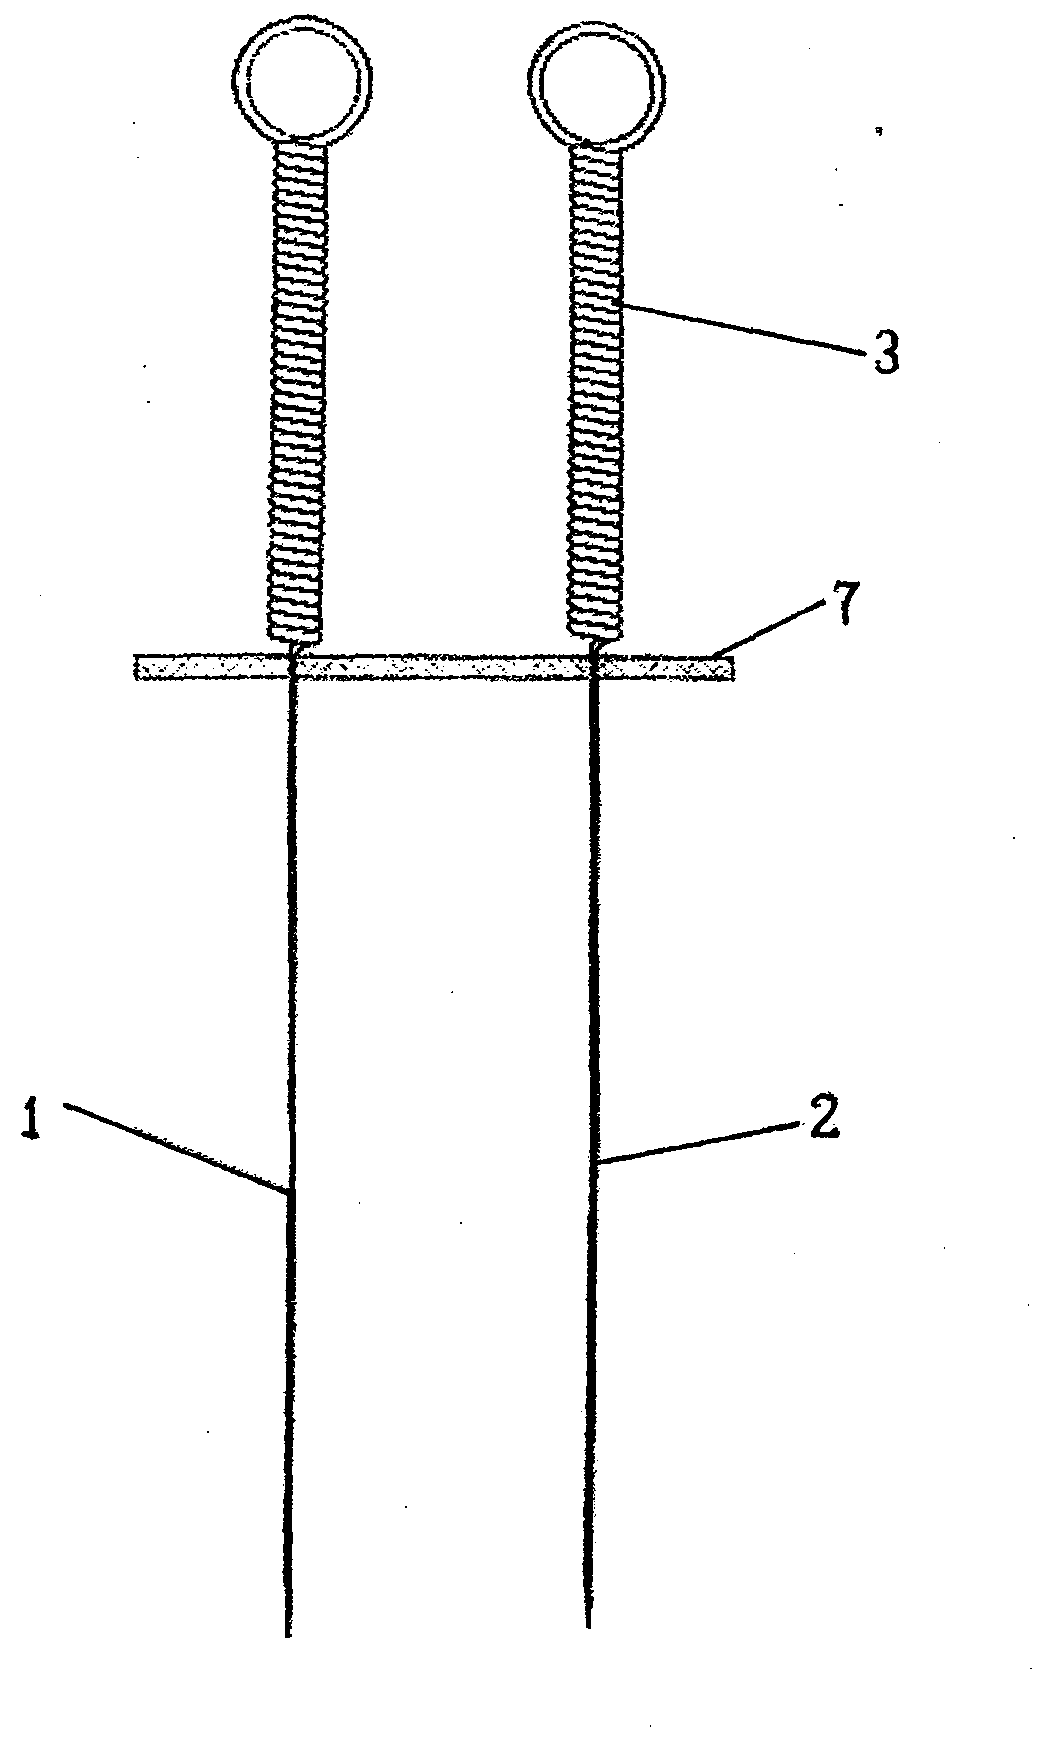 Acupuncture needle with electrolytic effect